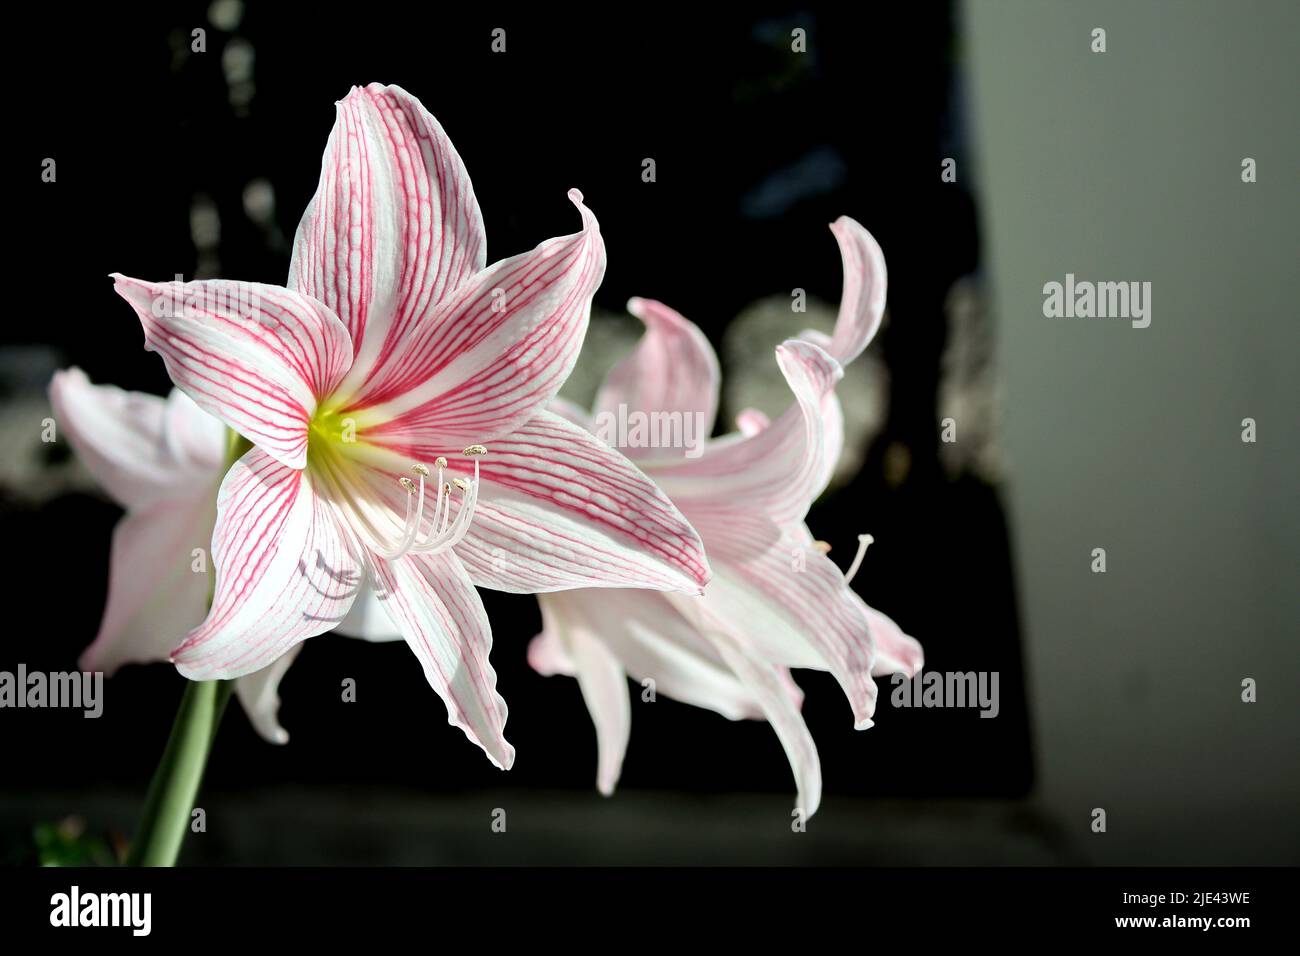 Hippeastrum johnsonii has a trunk as a head underground. There is a pink color at the end of the flower. The flower is separated into 6 petals. Select Stock Photo